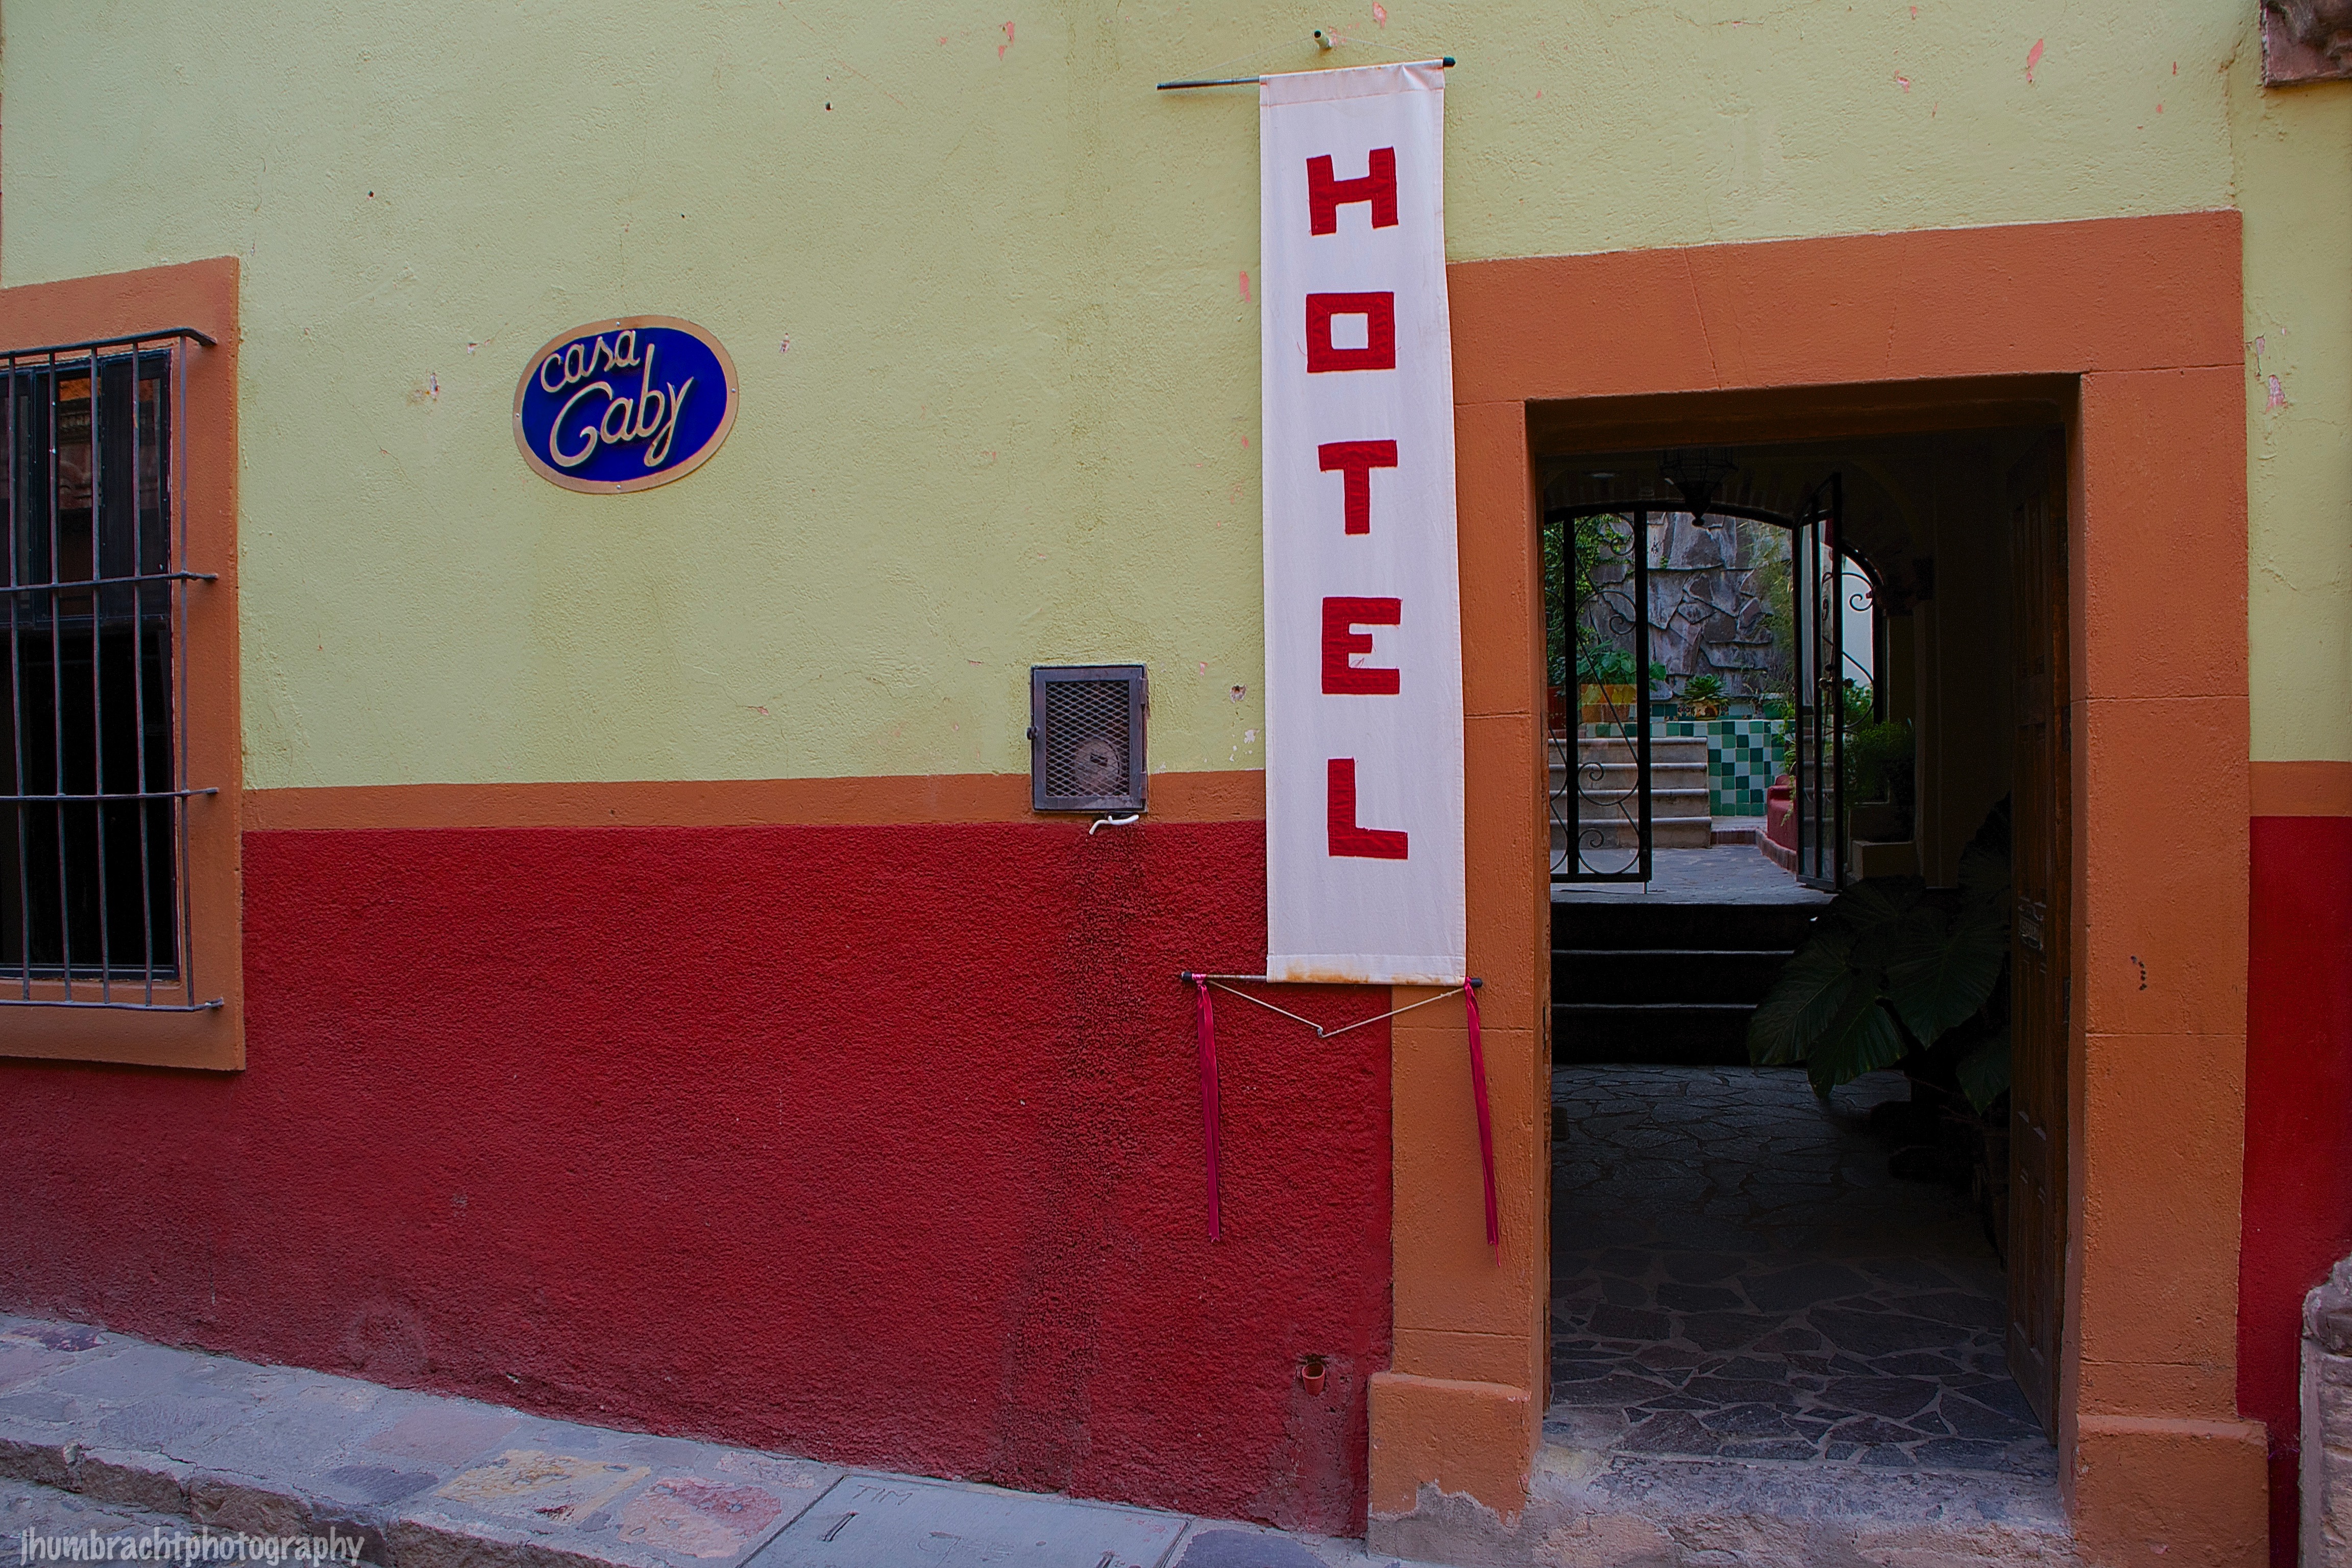 Hotel Gaby in San Miguel de Allende Mexico photo taken by Indiana Architectural Photographer Jason Humbracht in 2015